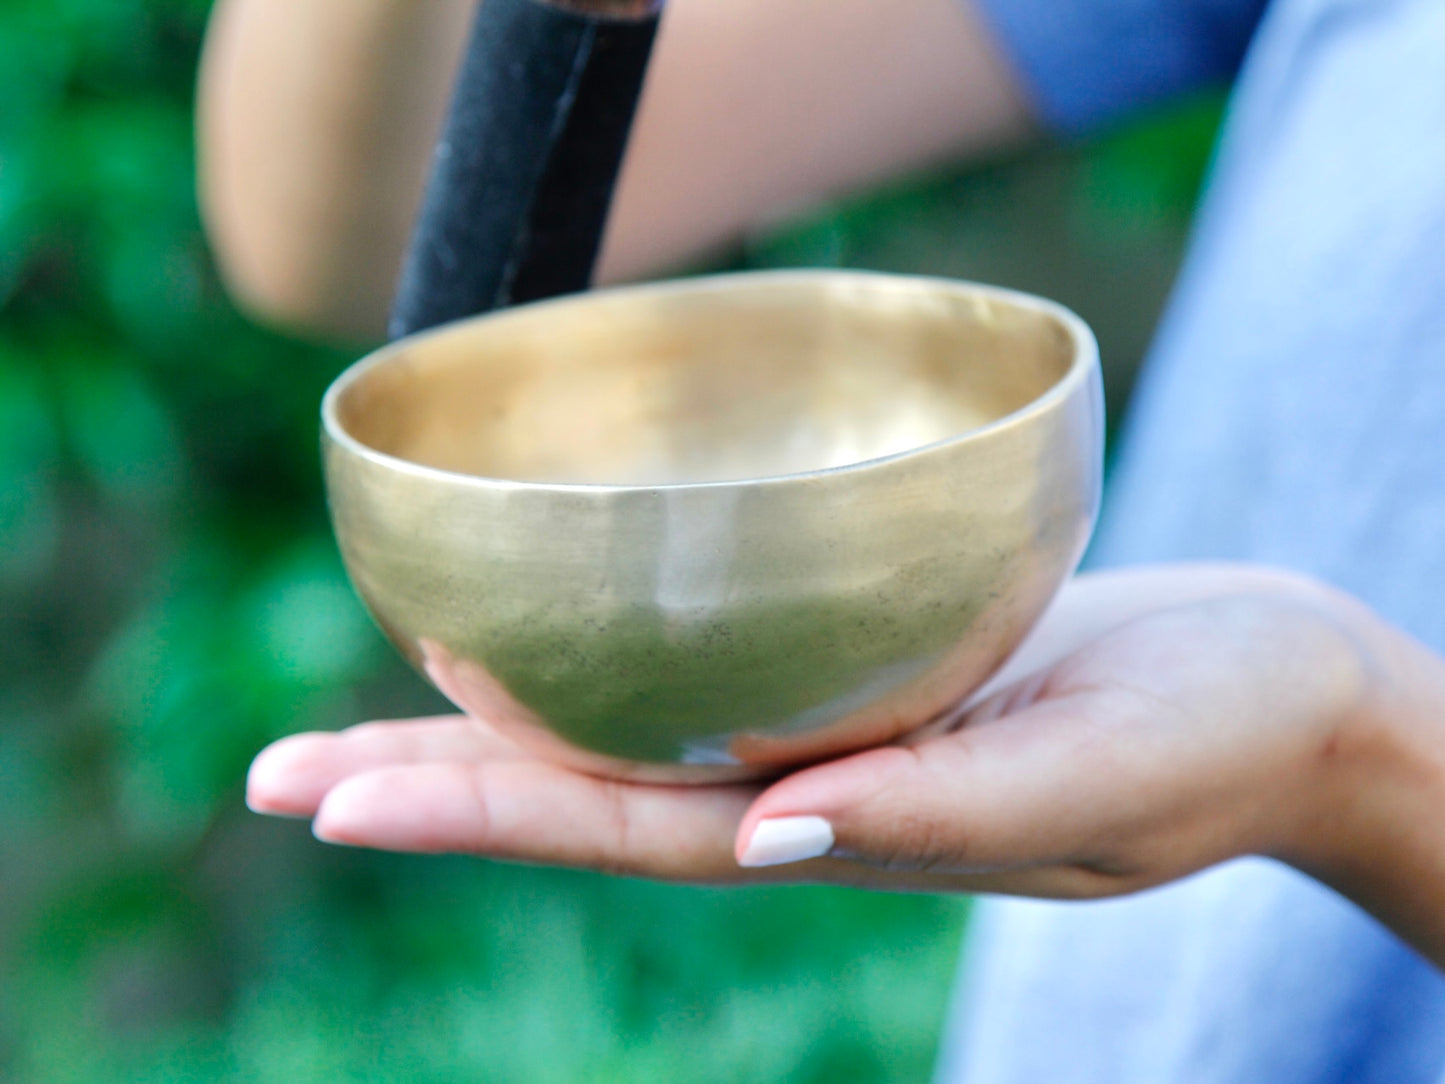 Small Contemporary Flow Singing Bowl - Base note C5 535 Hz